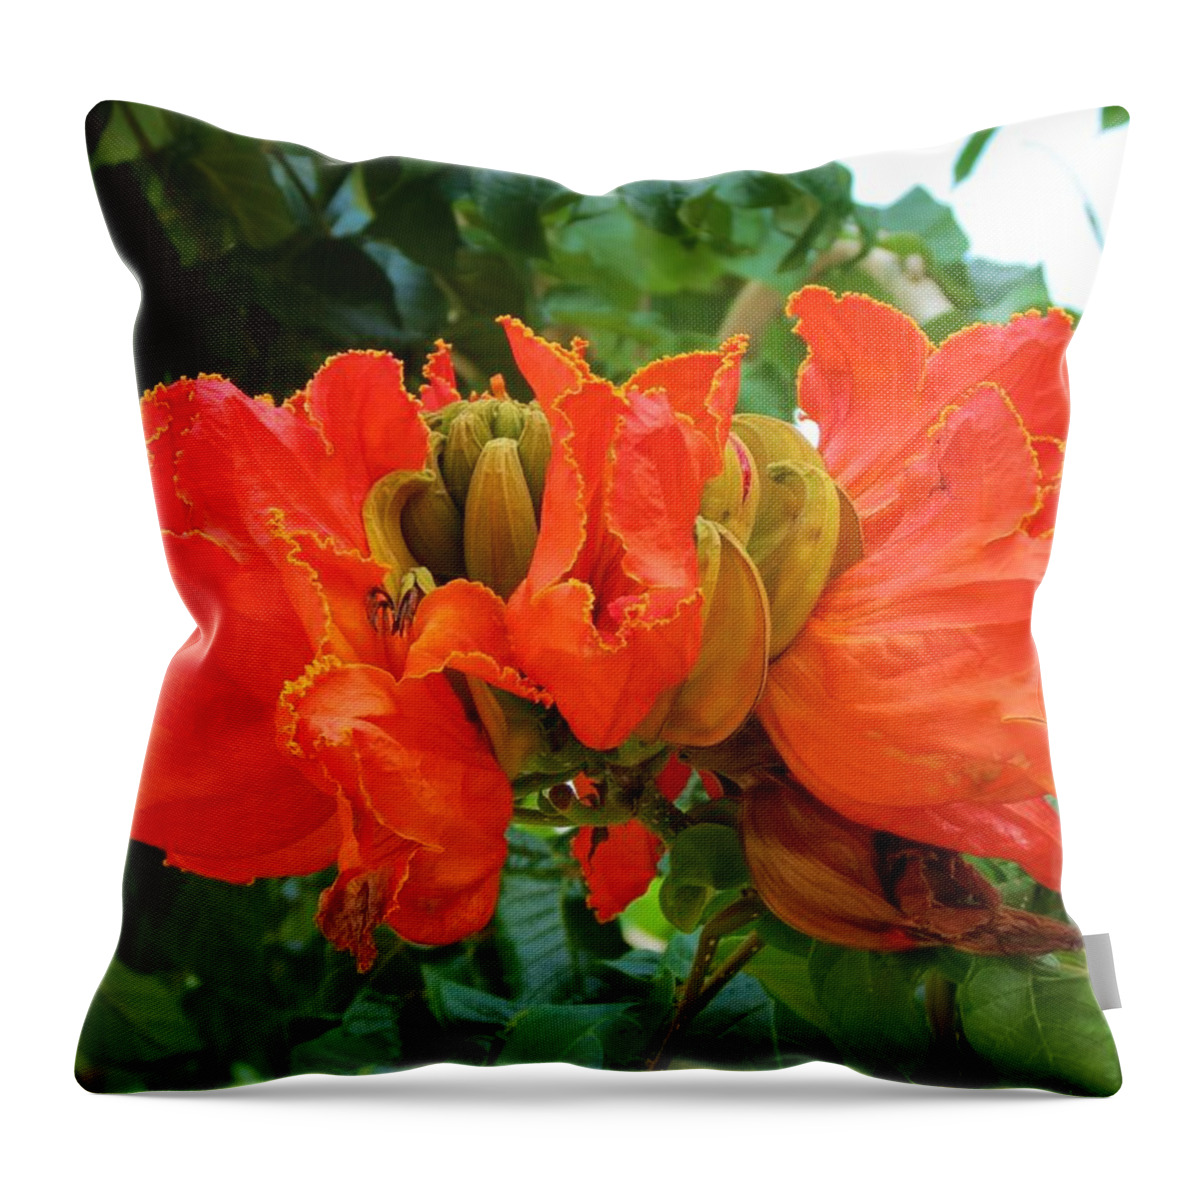 Mexico Throw Pillow featuring the photograph Orange Flowers by Vijay Sharon Govender